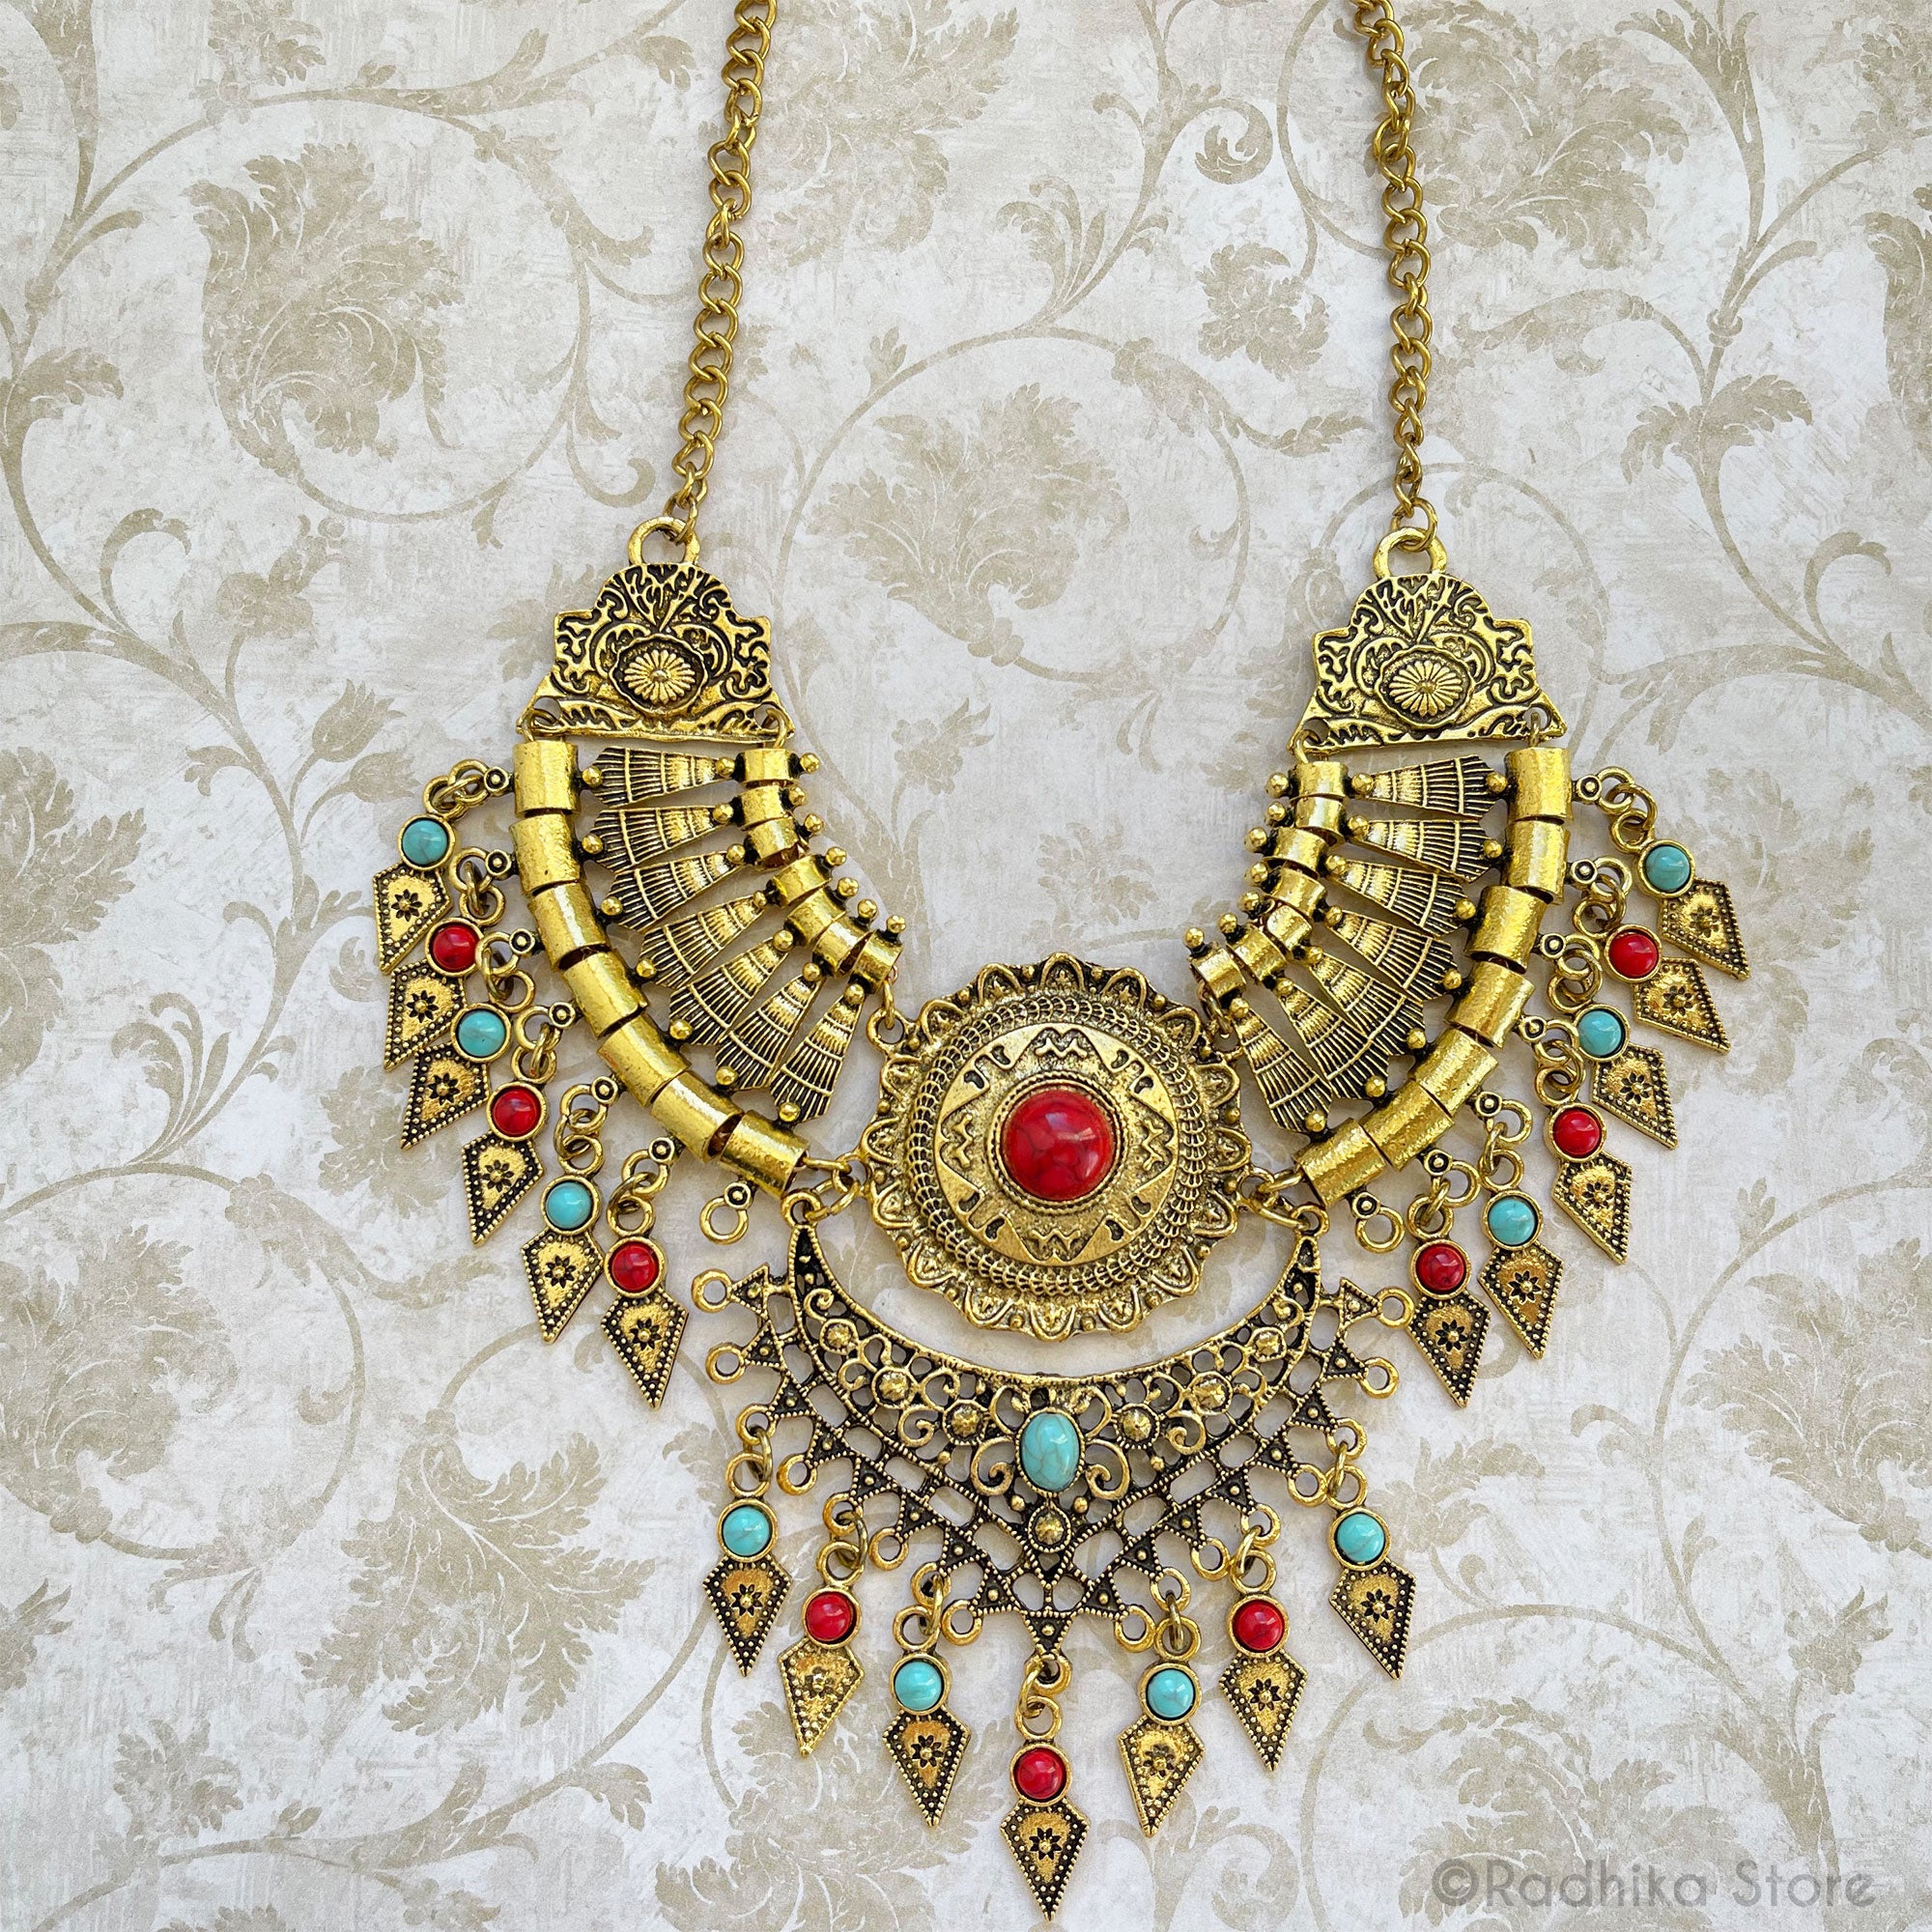 Gaurada Necklace/ Belt - Gold With Turquoise and Coral